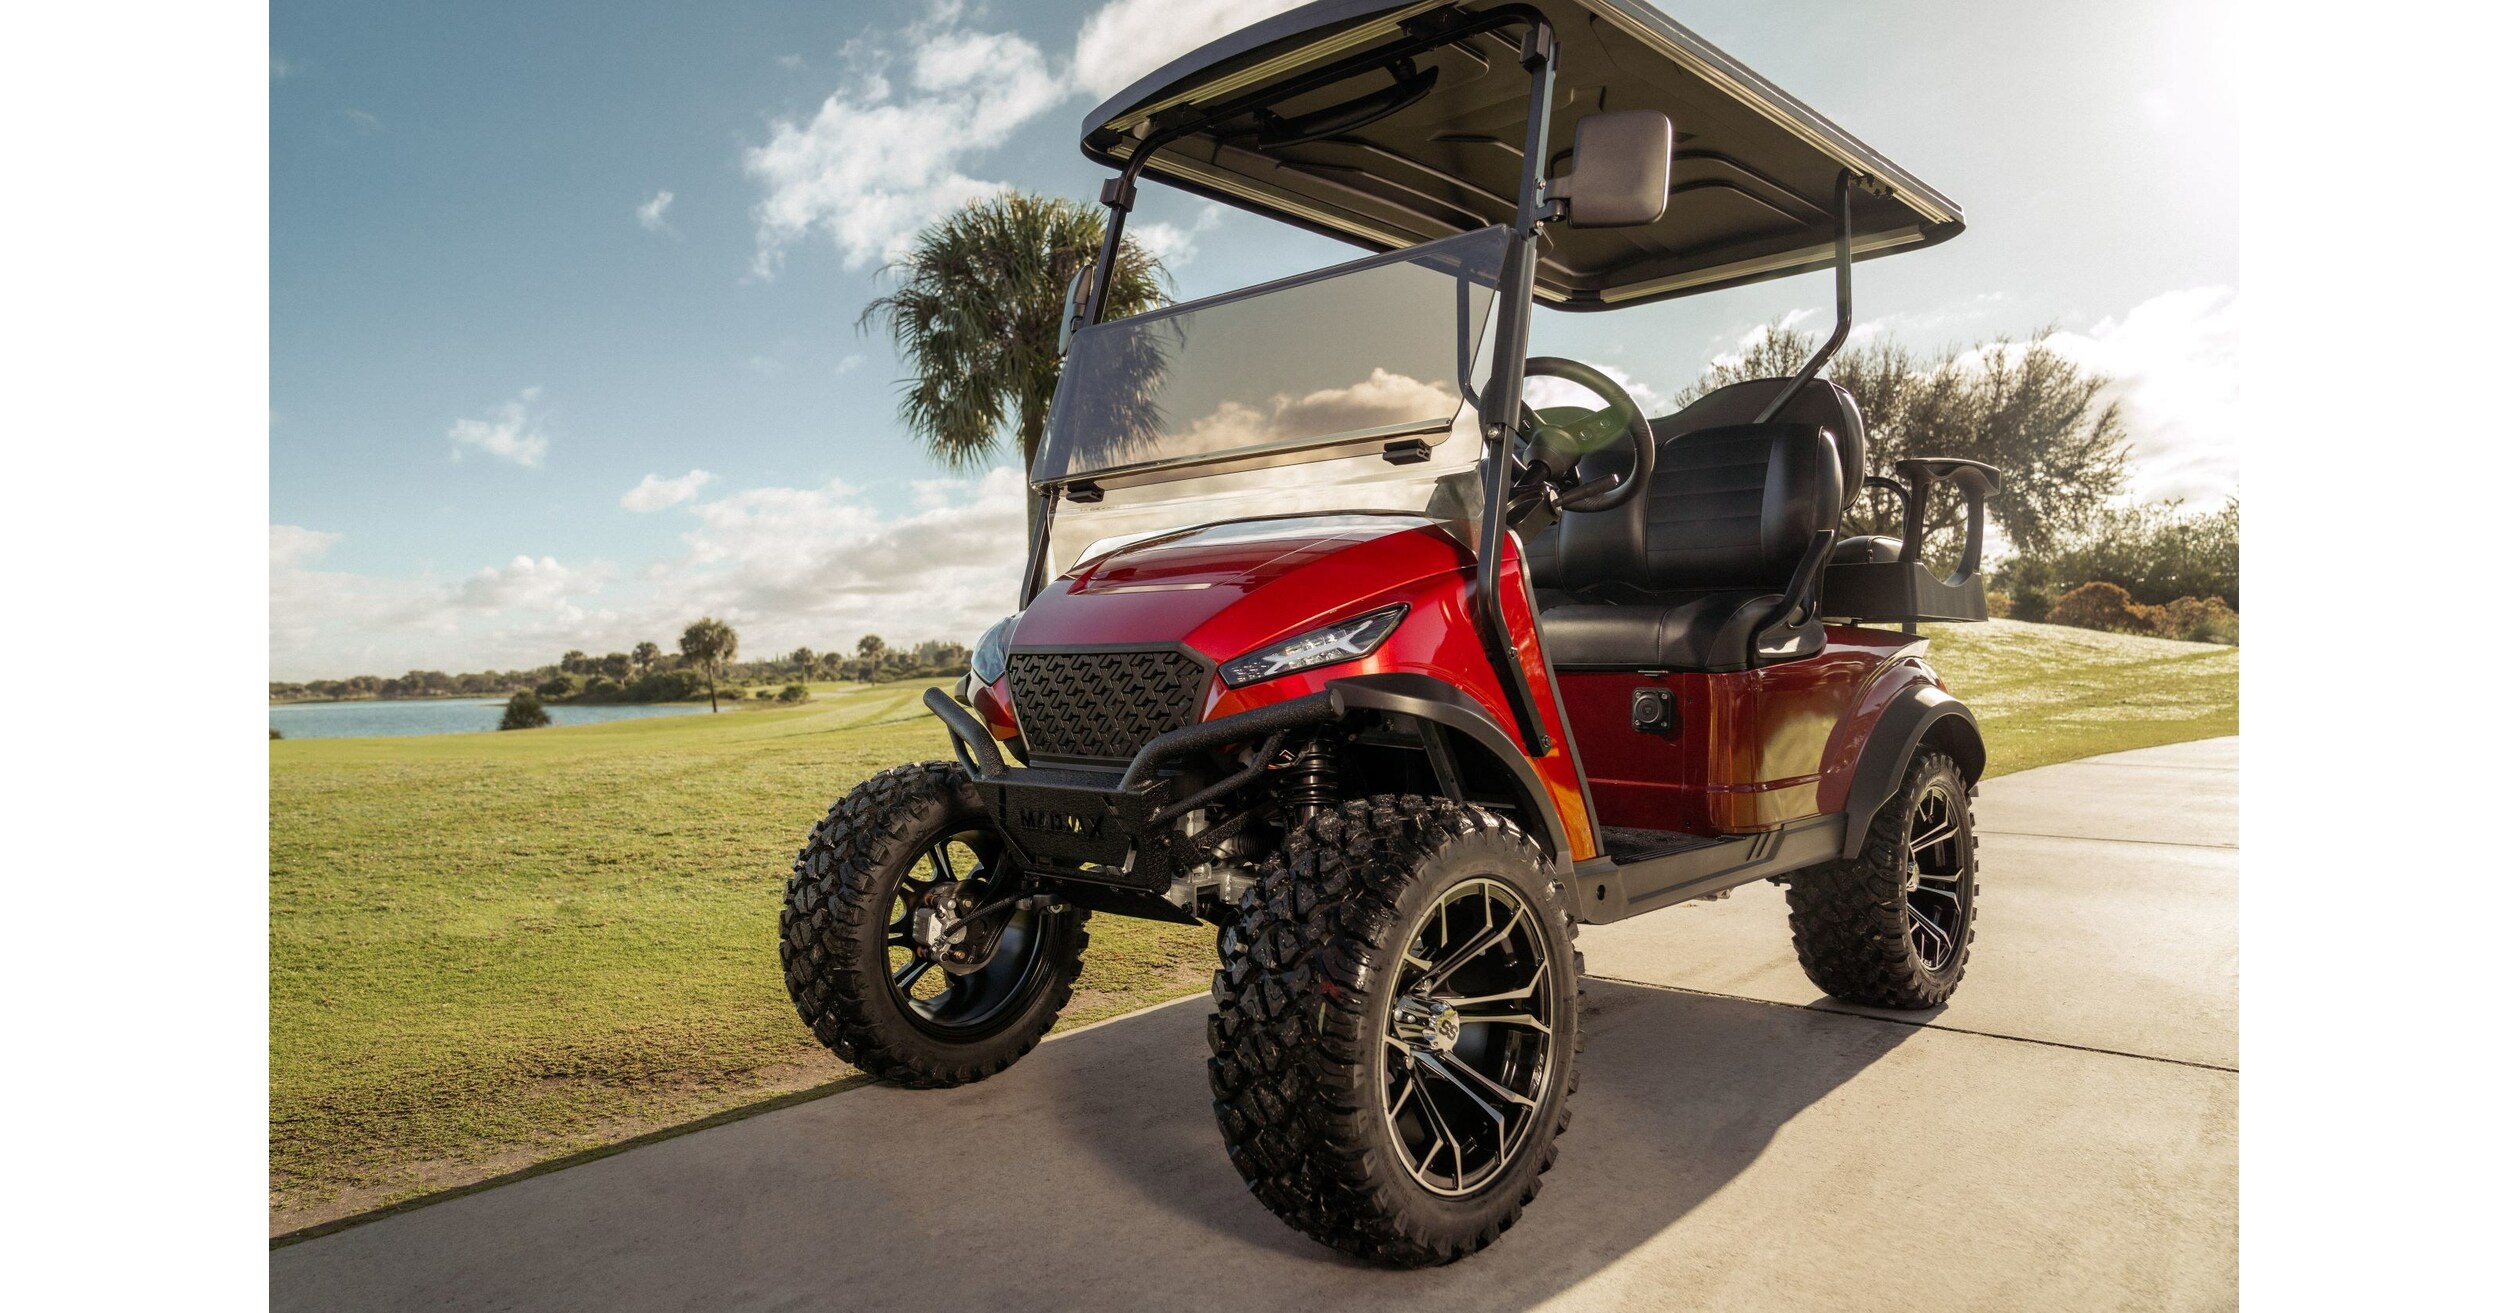 Nivel Parts & Manufacturing Launches New Golf Cart, the MadJax